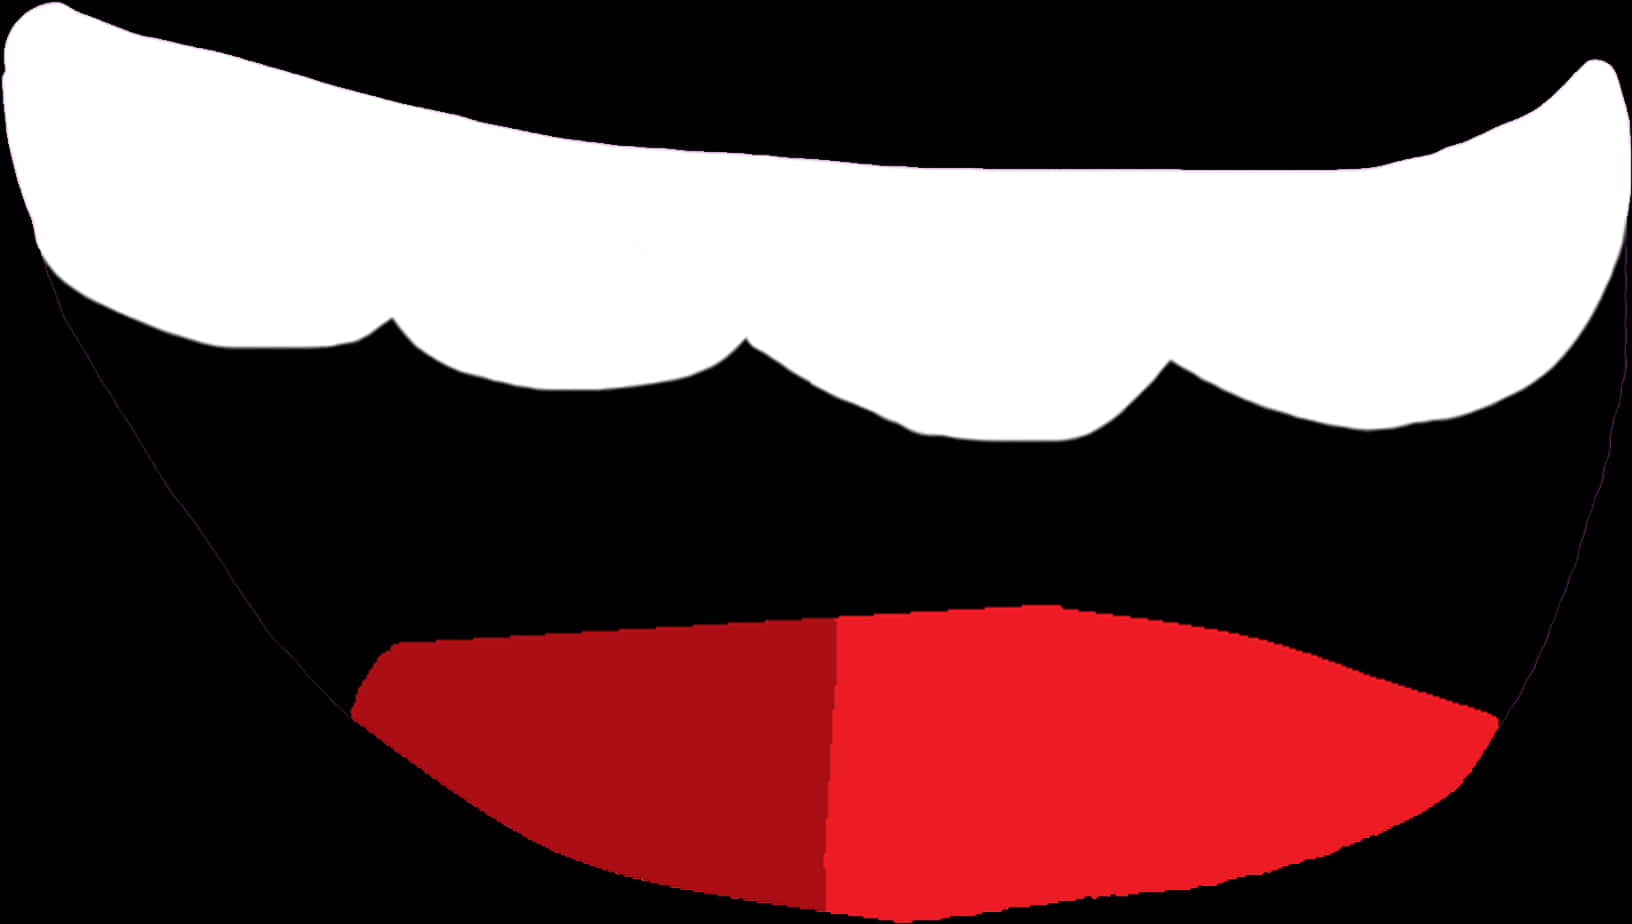 A Cartoon Face With A Red Lips And White Teeth